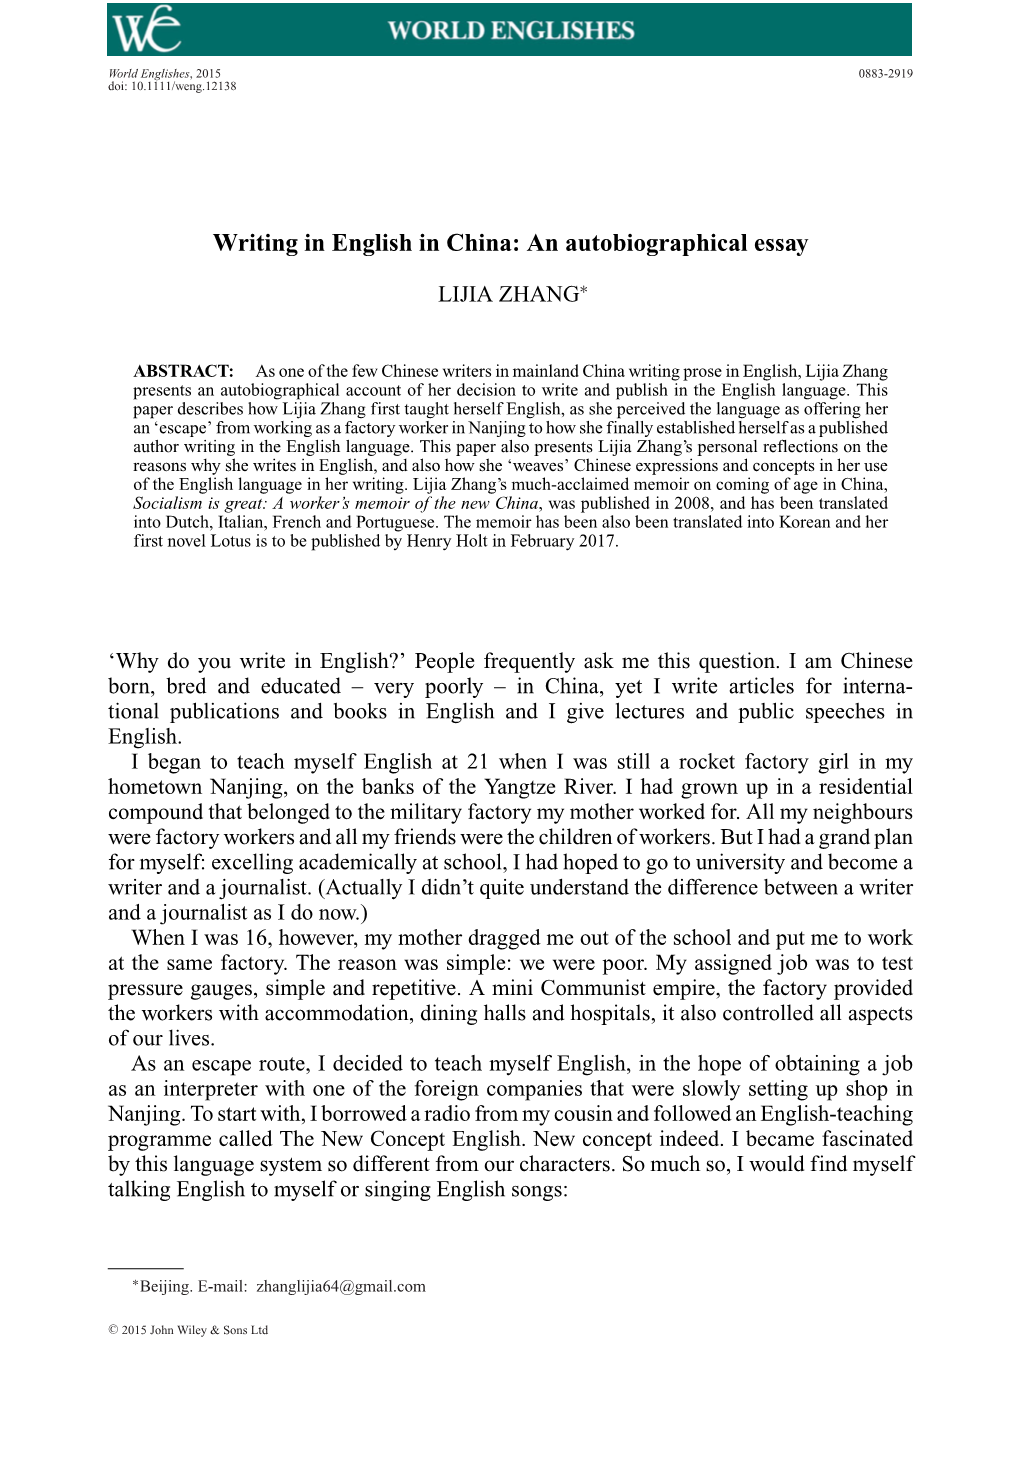 Writing in English in China: an Autobiographical Essay